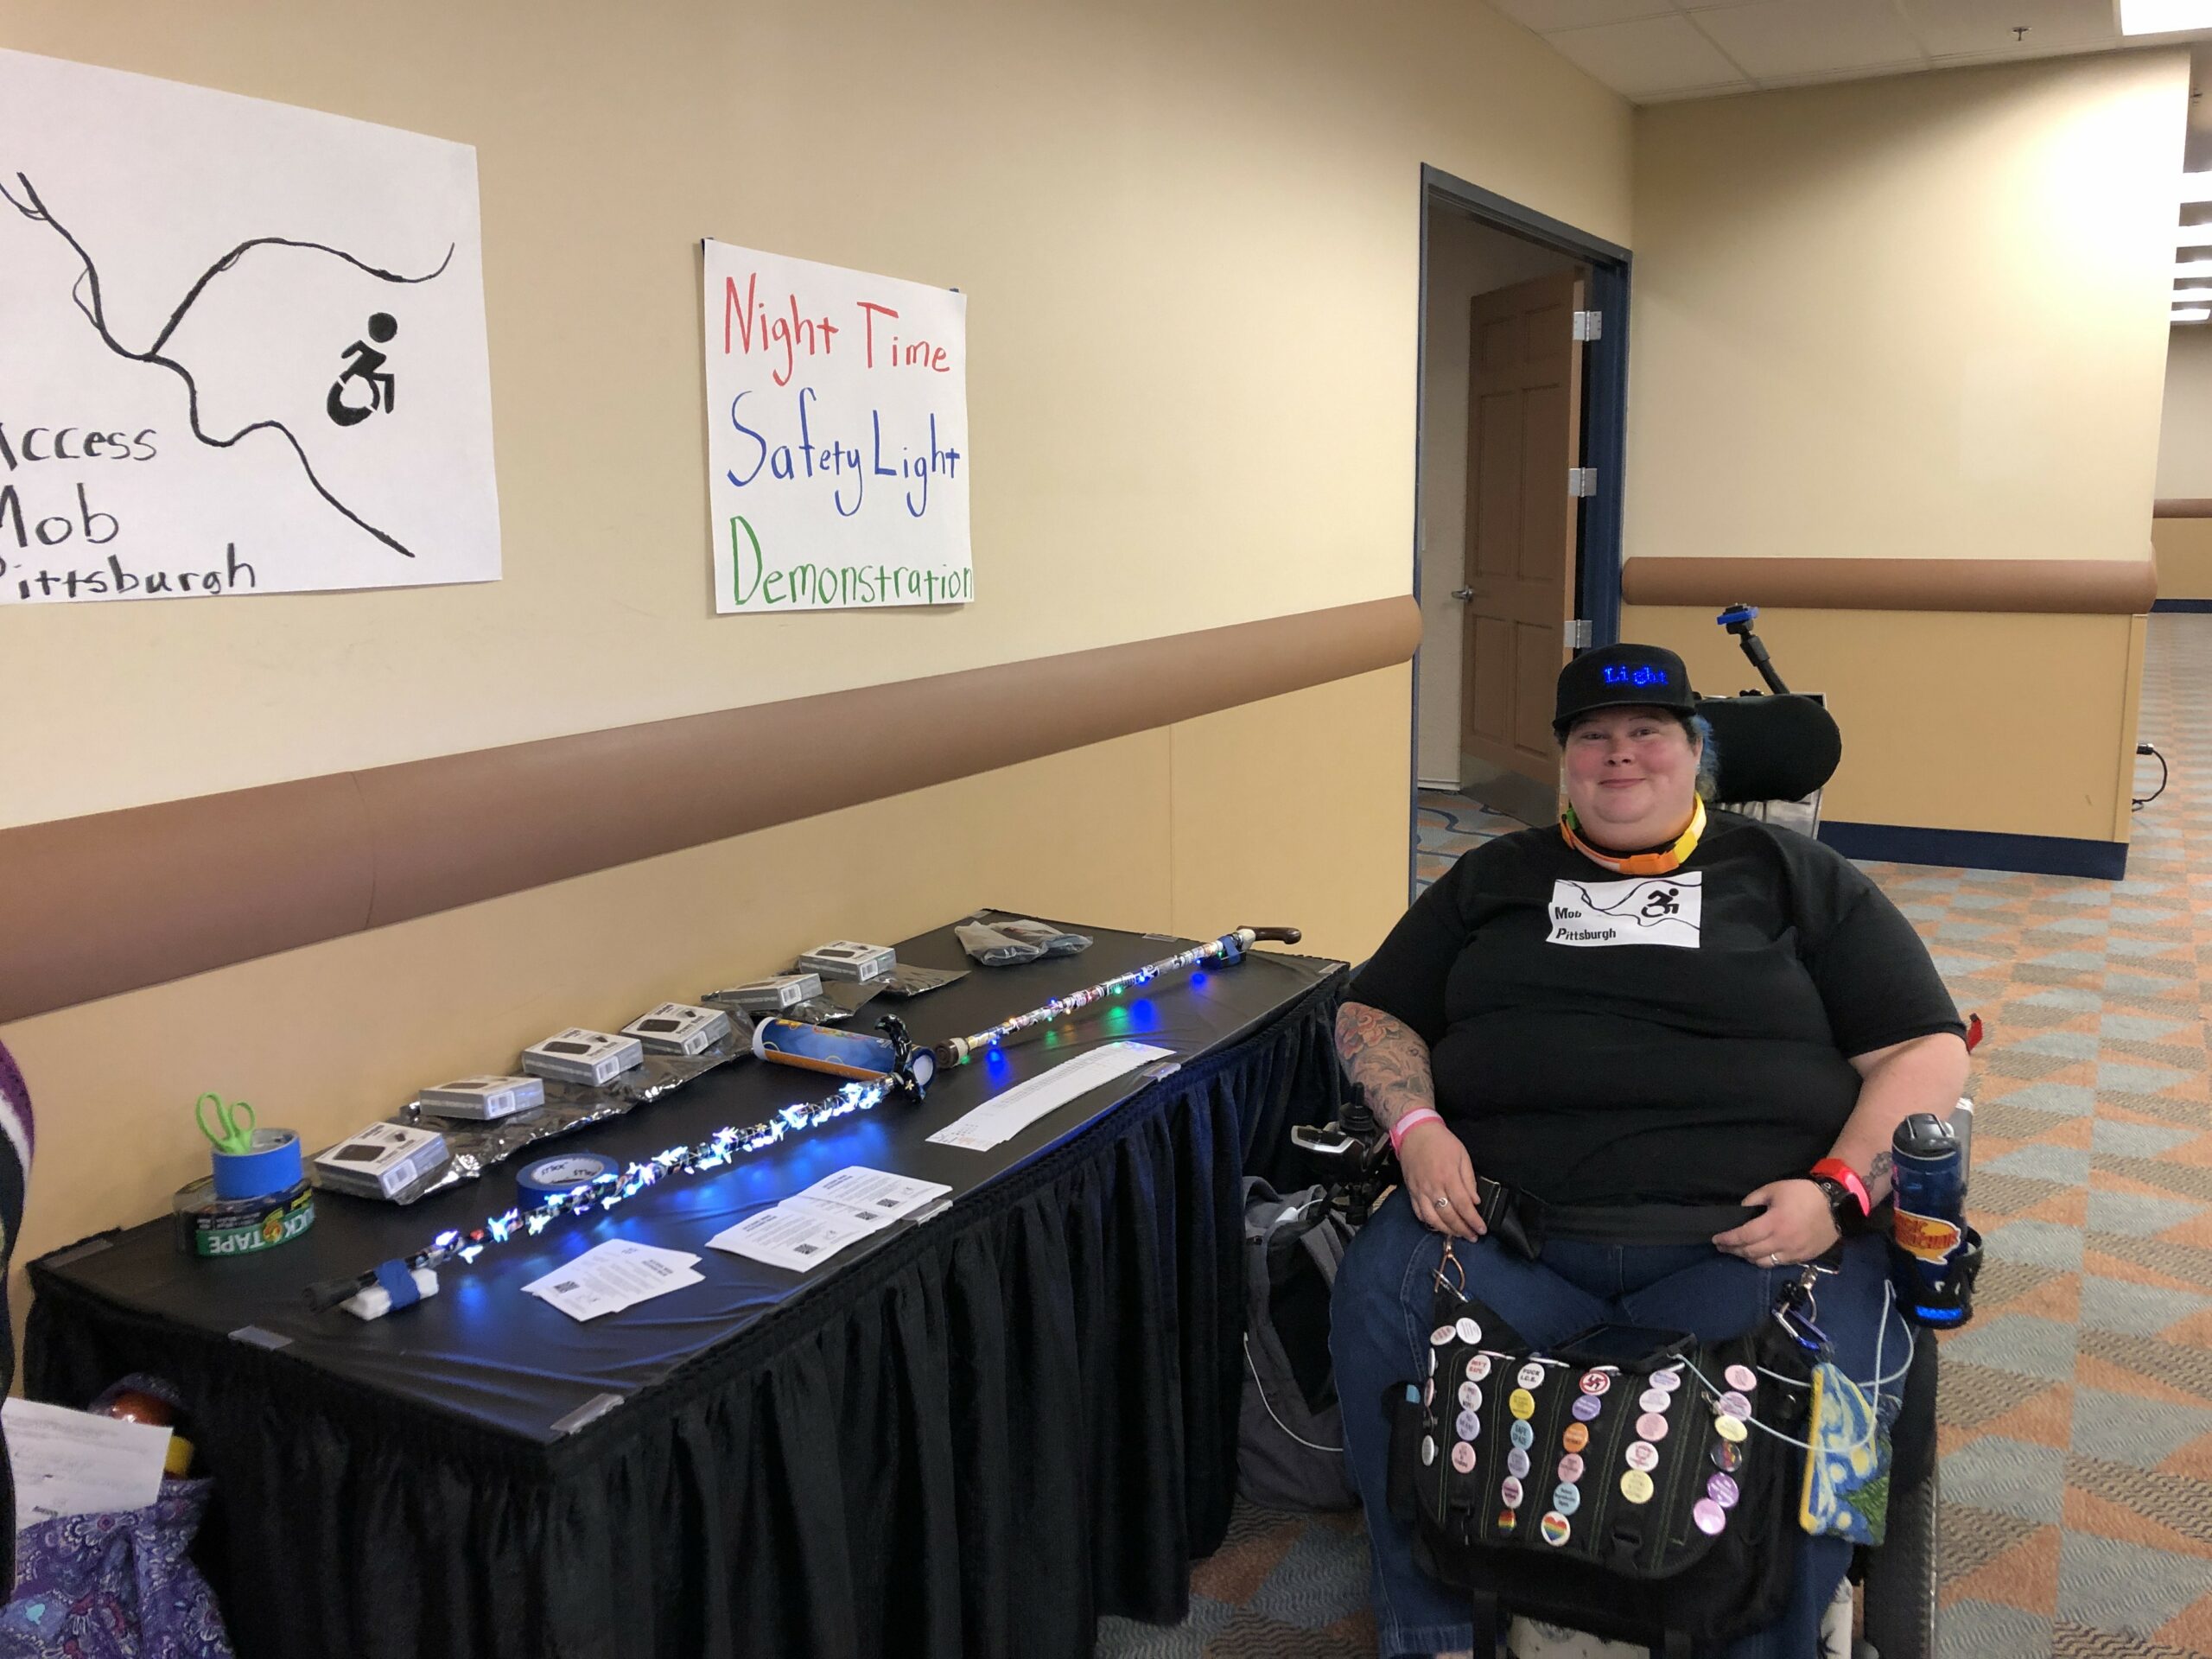 Alisa Grishman seated in her power chair next to a table that features illuminated canes.  A sign for Access Mob Pittsburgh and a sign for Night Time Safety Light Demonstration hang on the wall above the table.